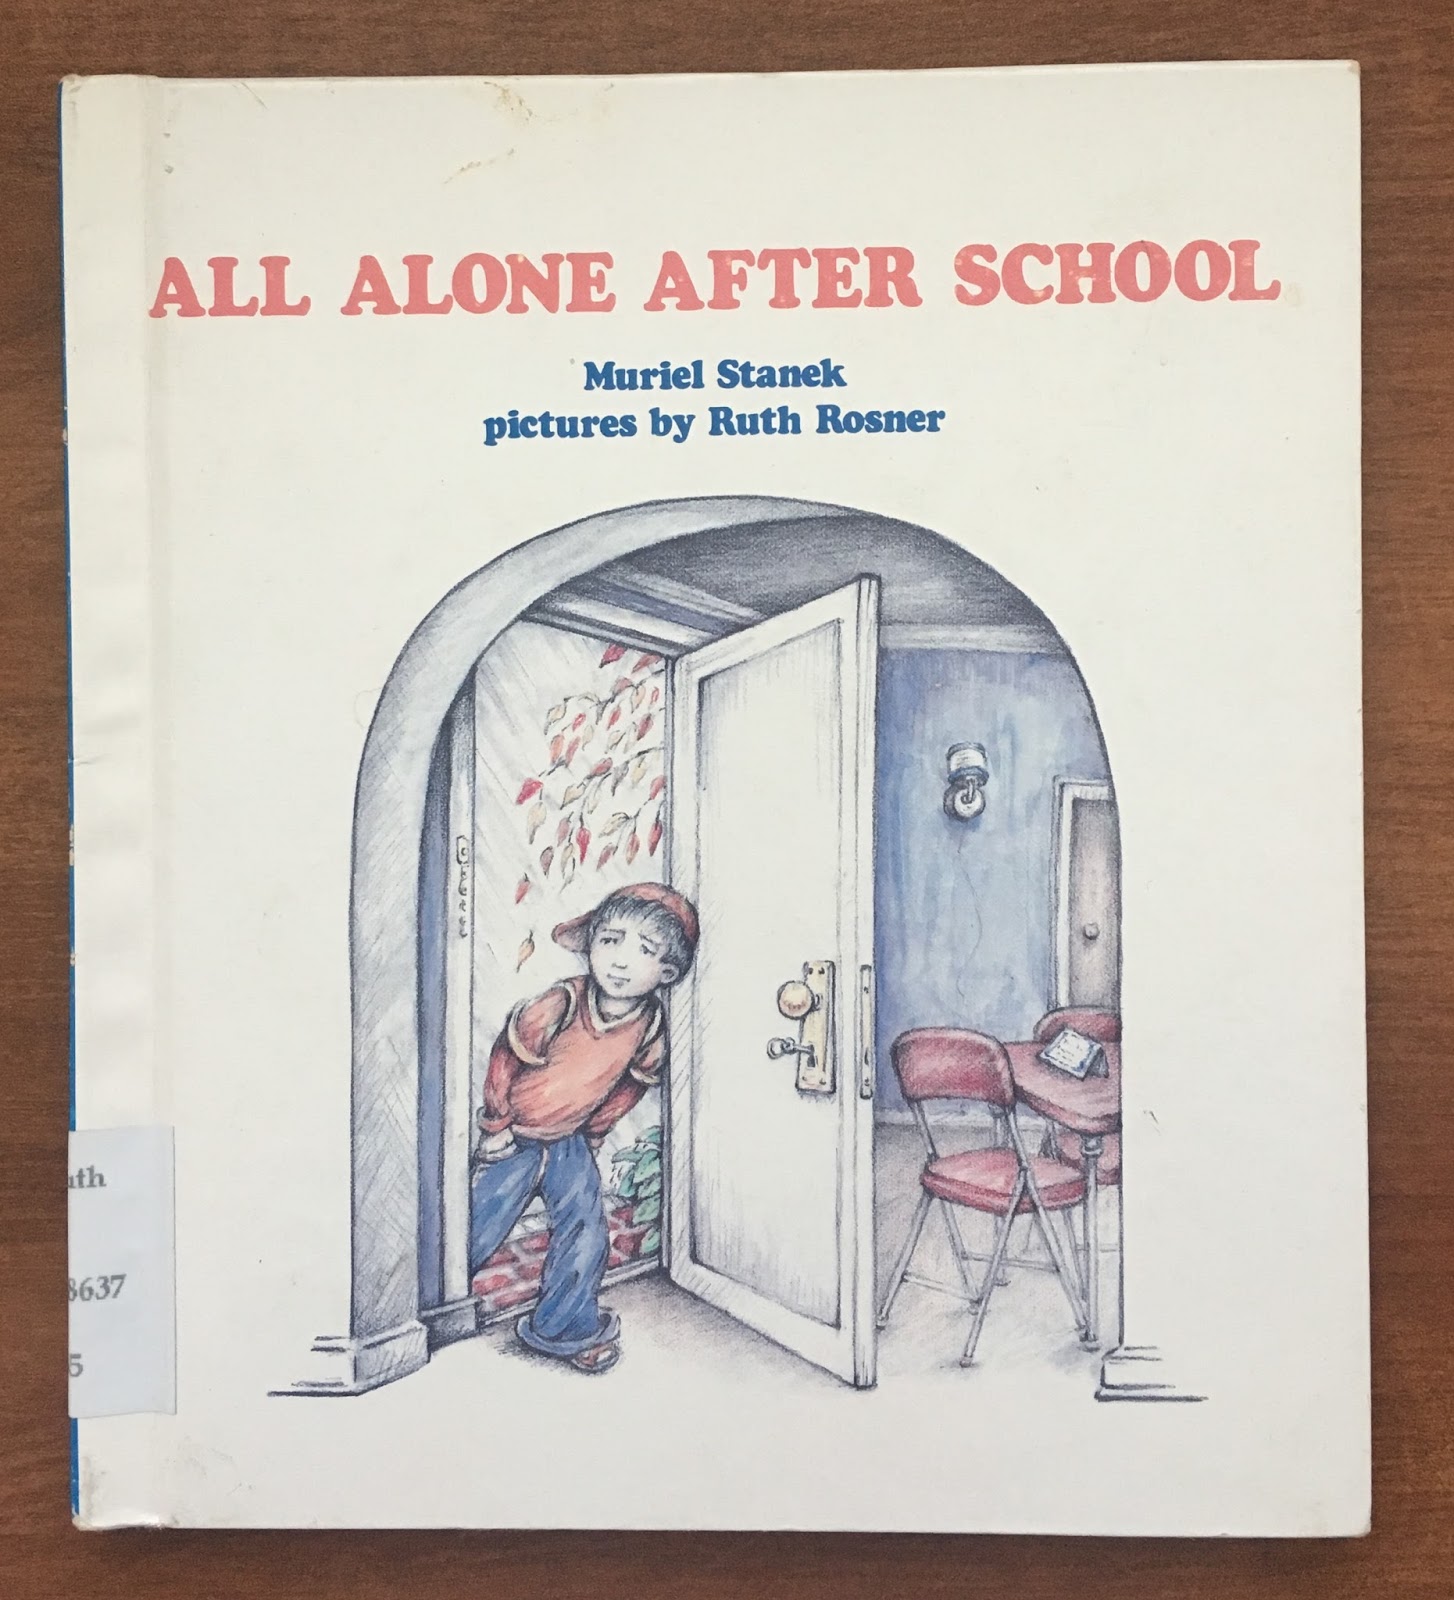 All Alone After School1454 x 1600